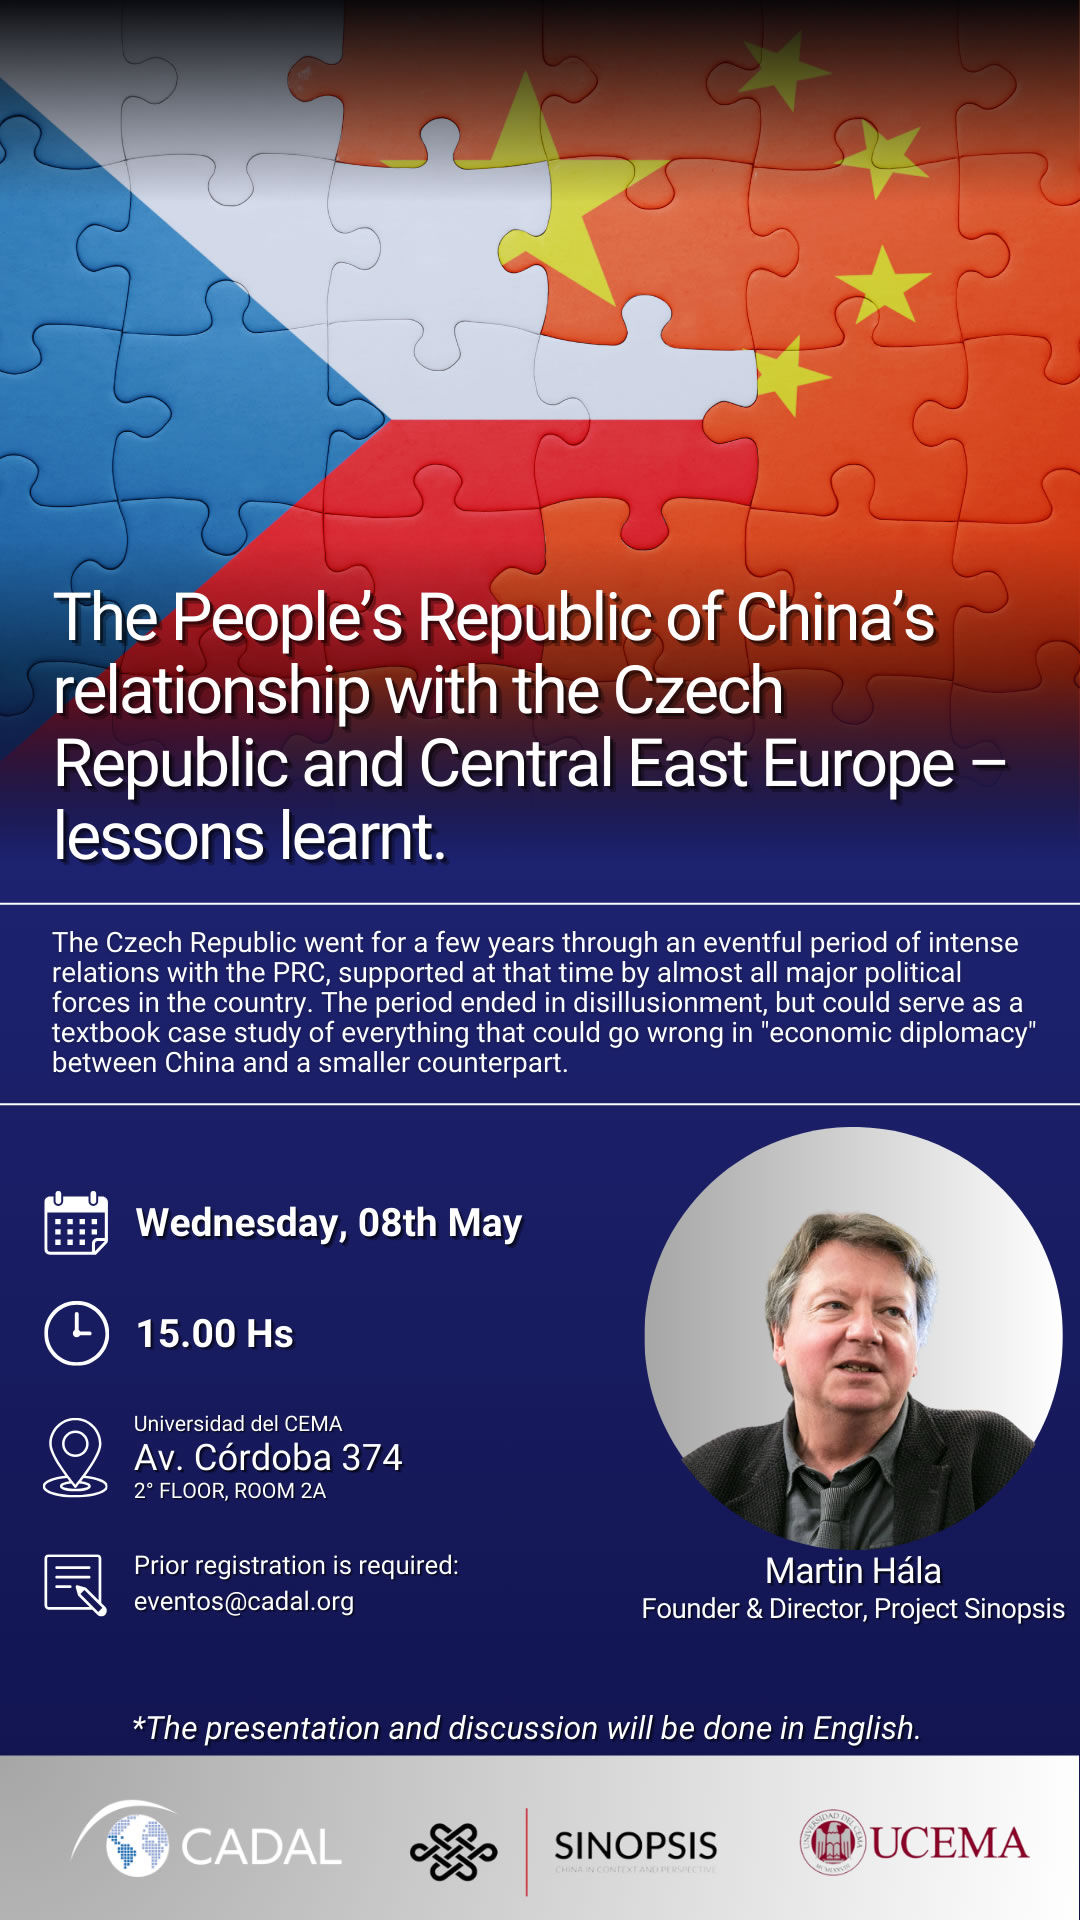 The People’s Republic of China’s relationship with the Czech Republic and Central East Europe lessons learnt